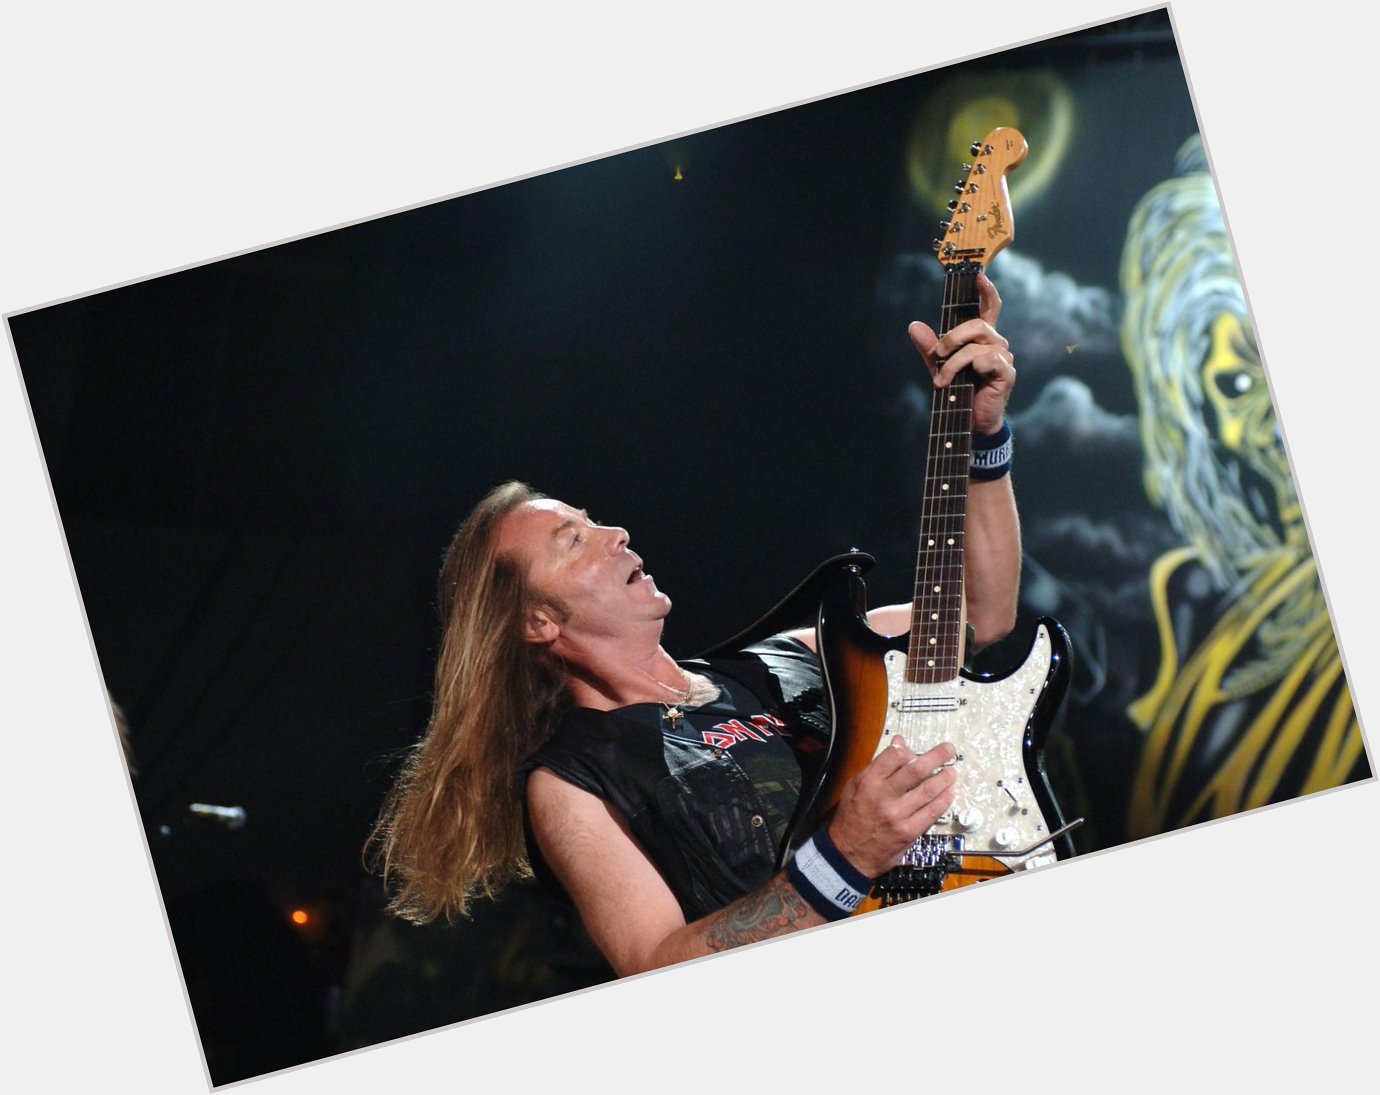 Join us to wish a Happy Birthday to the incredible shredder, Dave Murray of 